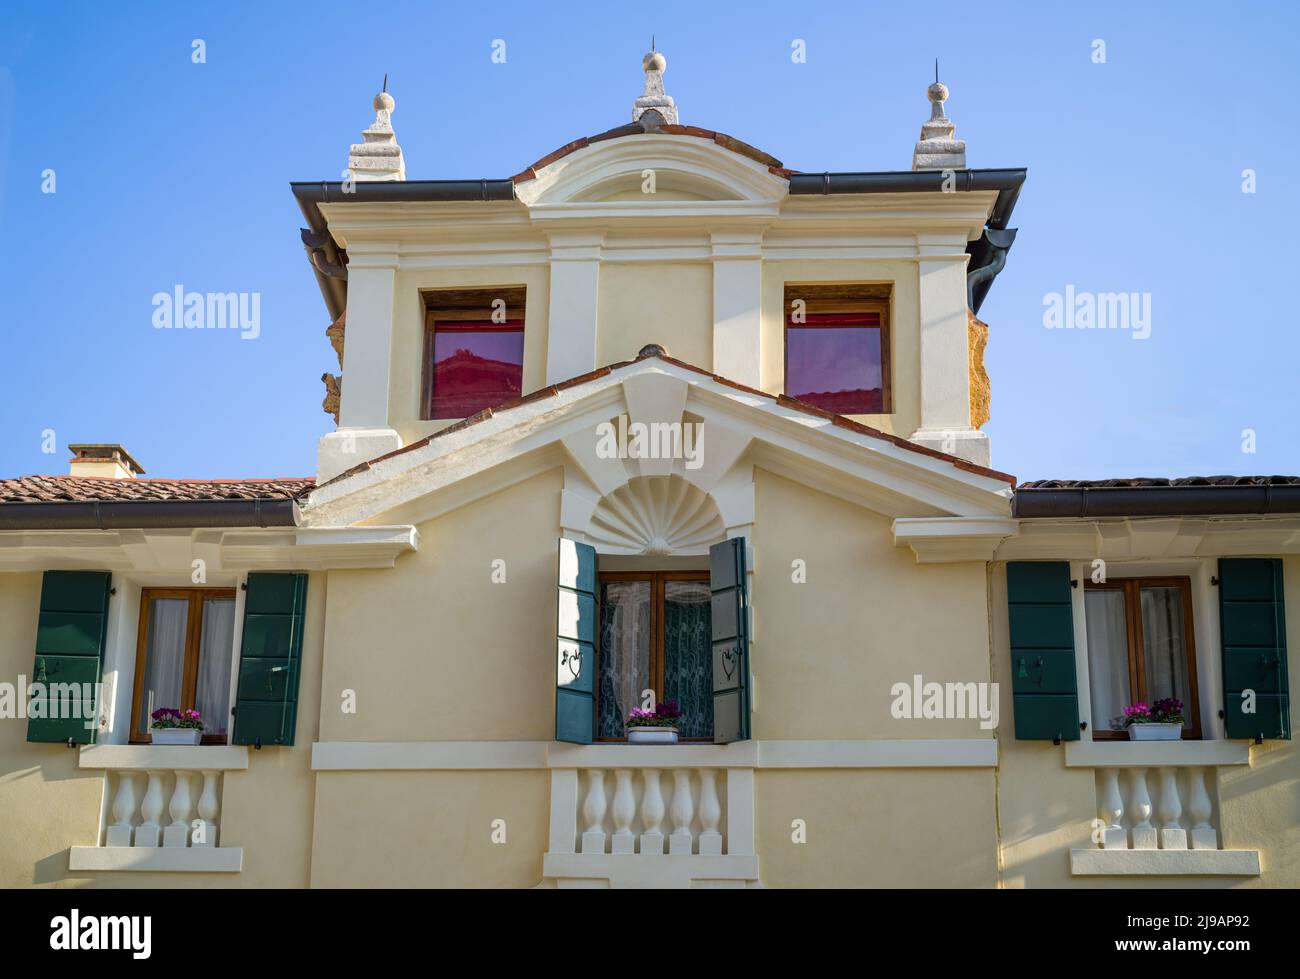 Italy, Montagnana, the Venetian-style architecture of a house in the old town Stock Photo